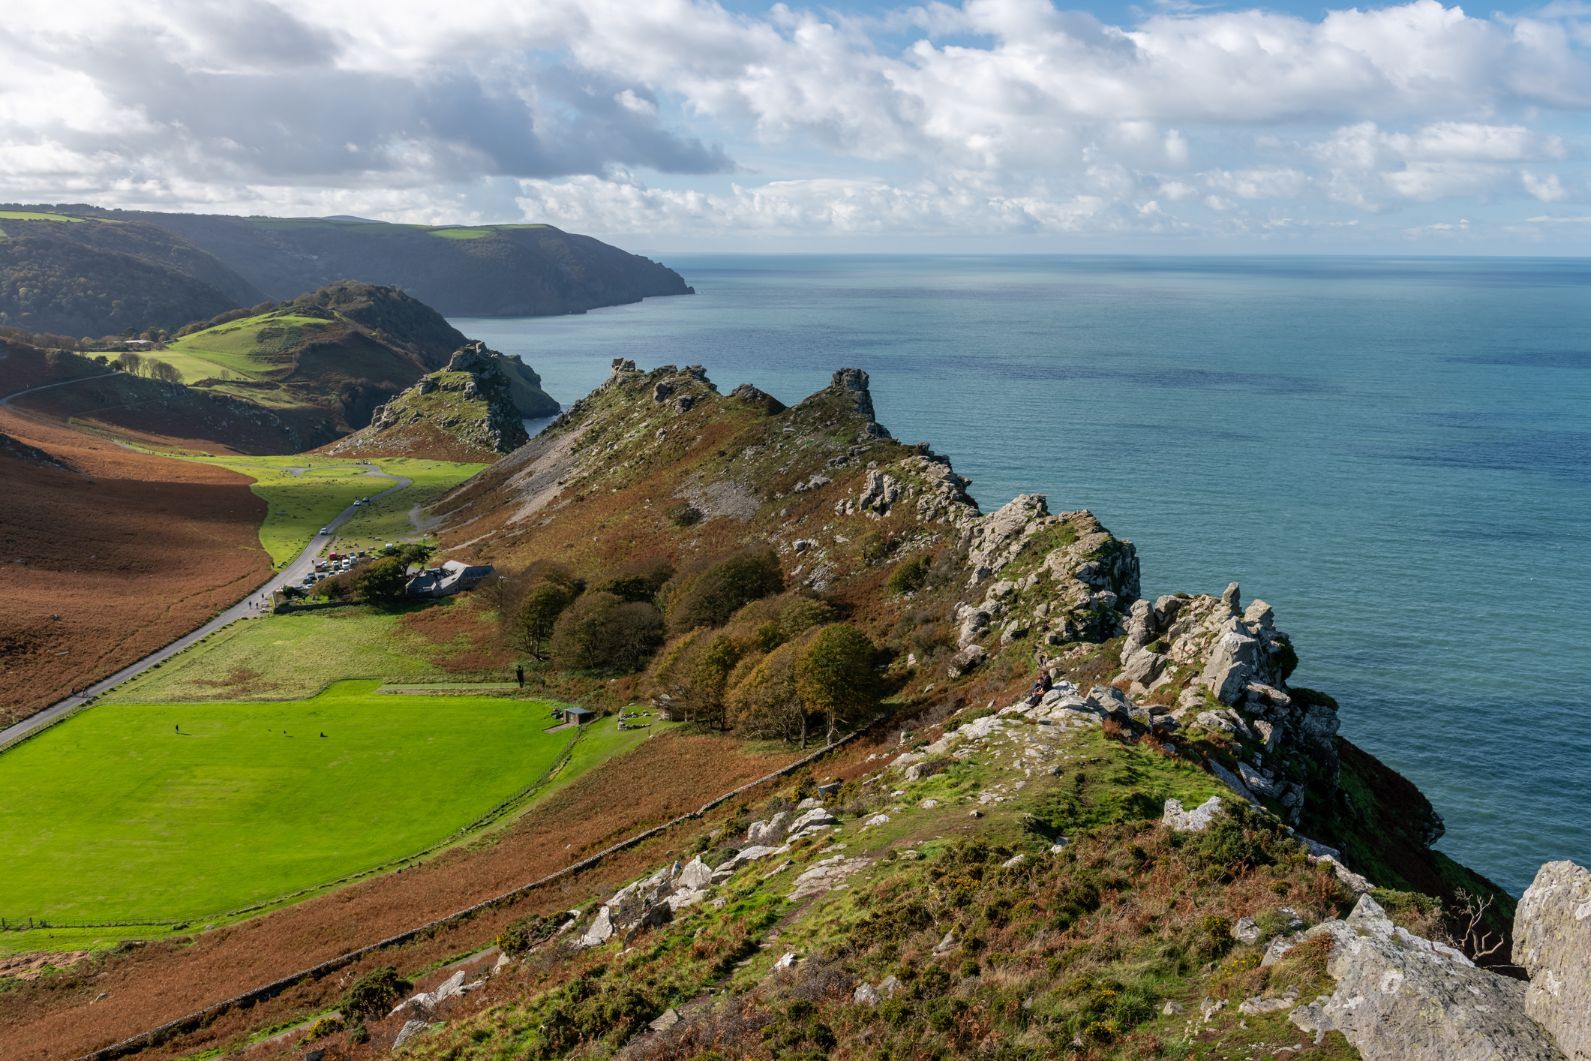 A view on the England Coastal Path, which is set to open this year.